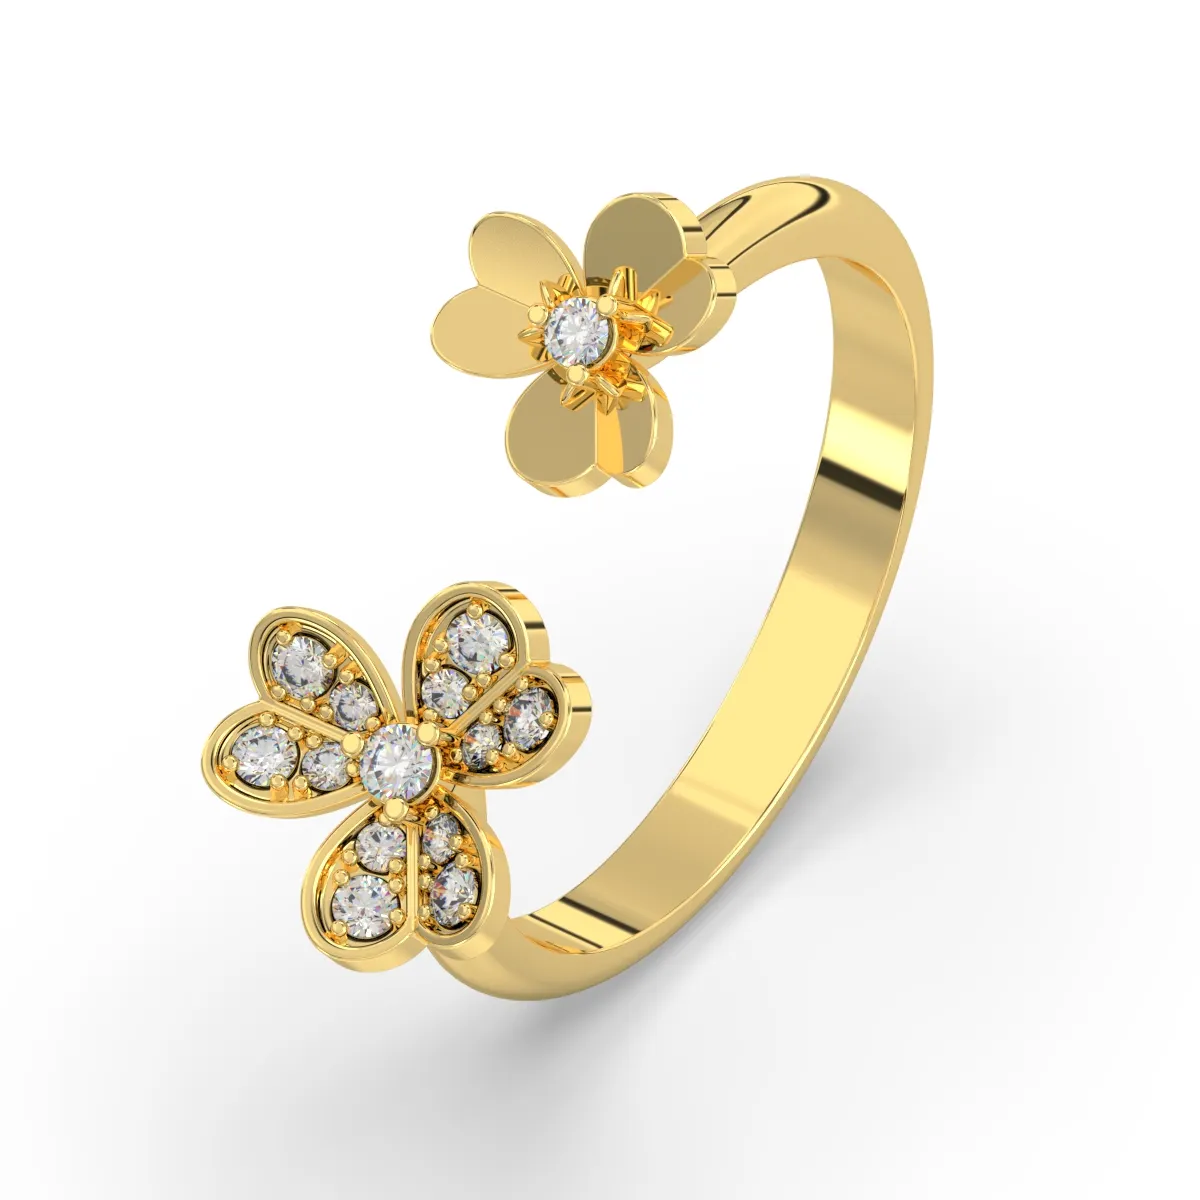 New Trendy 2022 Open Ring Gold Filled Jewelry Flower Shaped Cubic Zirconia Stone Adjustable Rings For Women Custom Jewelry